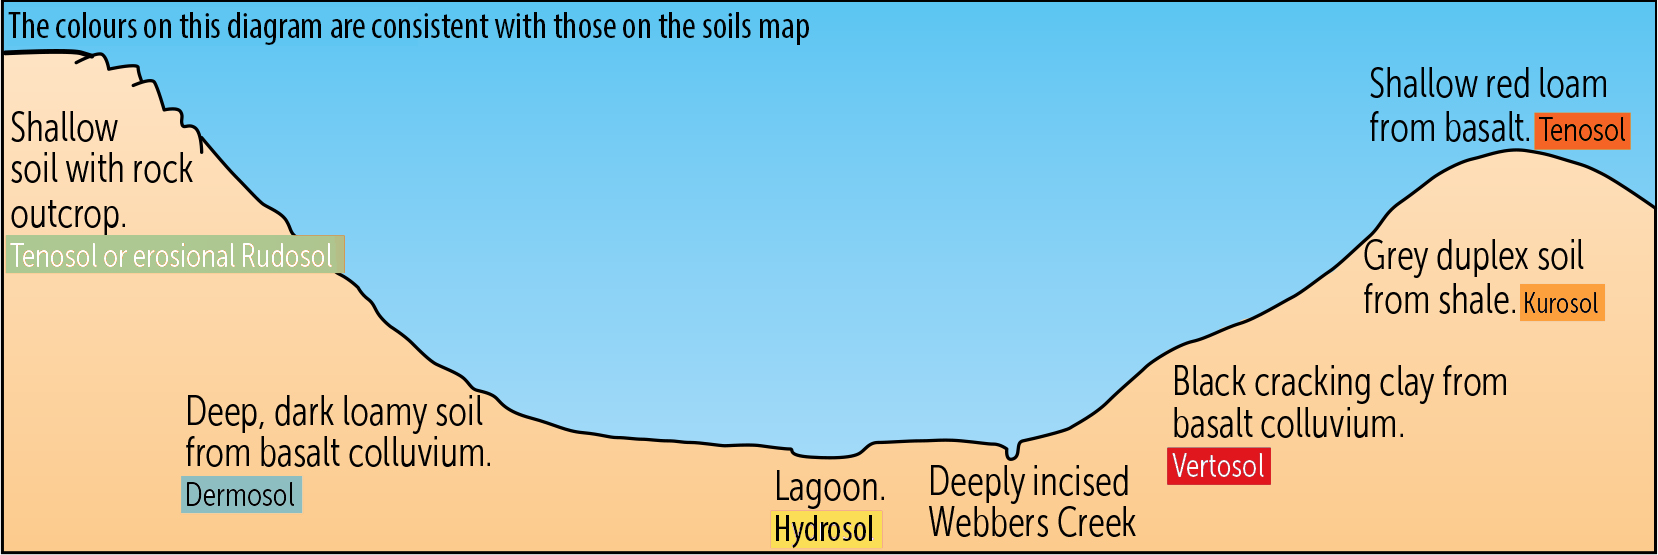 Position in the landscape influences the type of soils found across a property